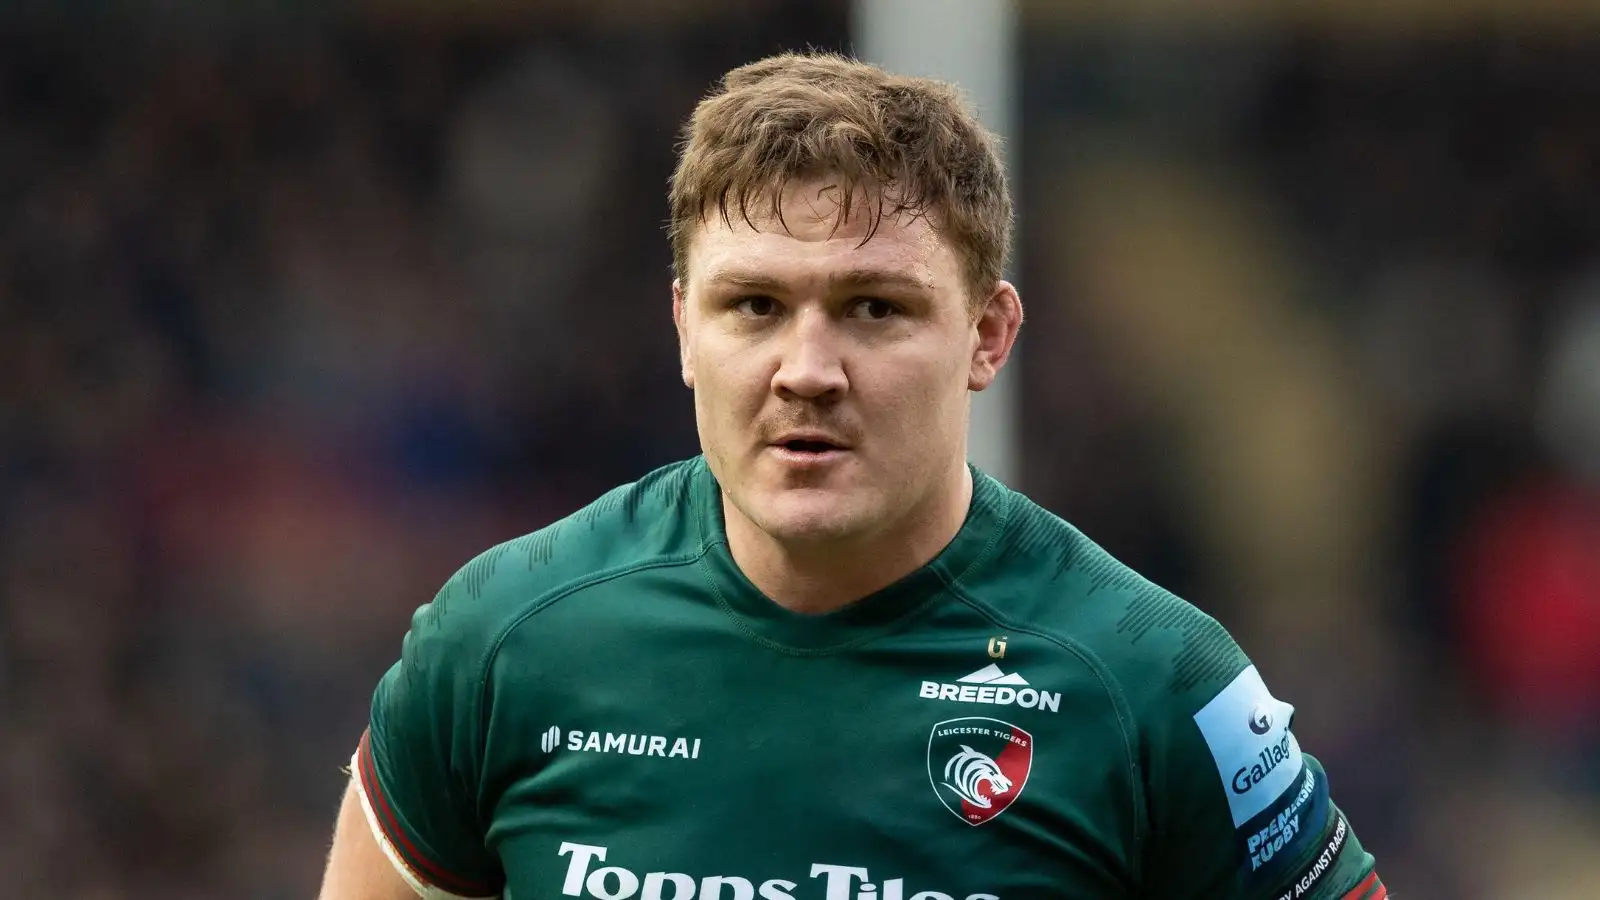 Leicester Tigers and Springboks number eight Jasper Wiese claimed the top award at the RPA awards dinner after another stellar Premiership season.